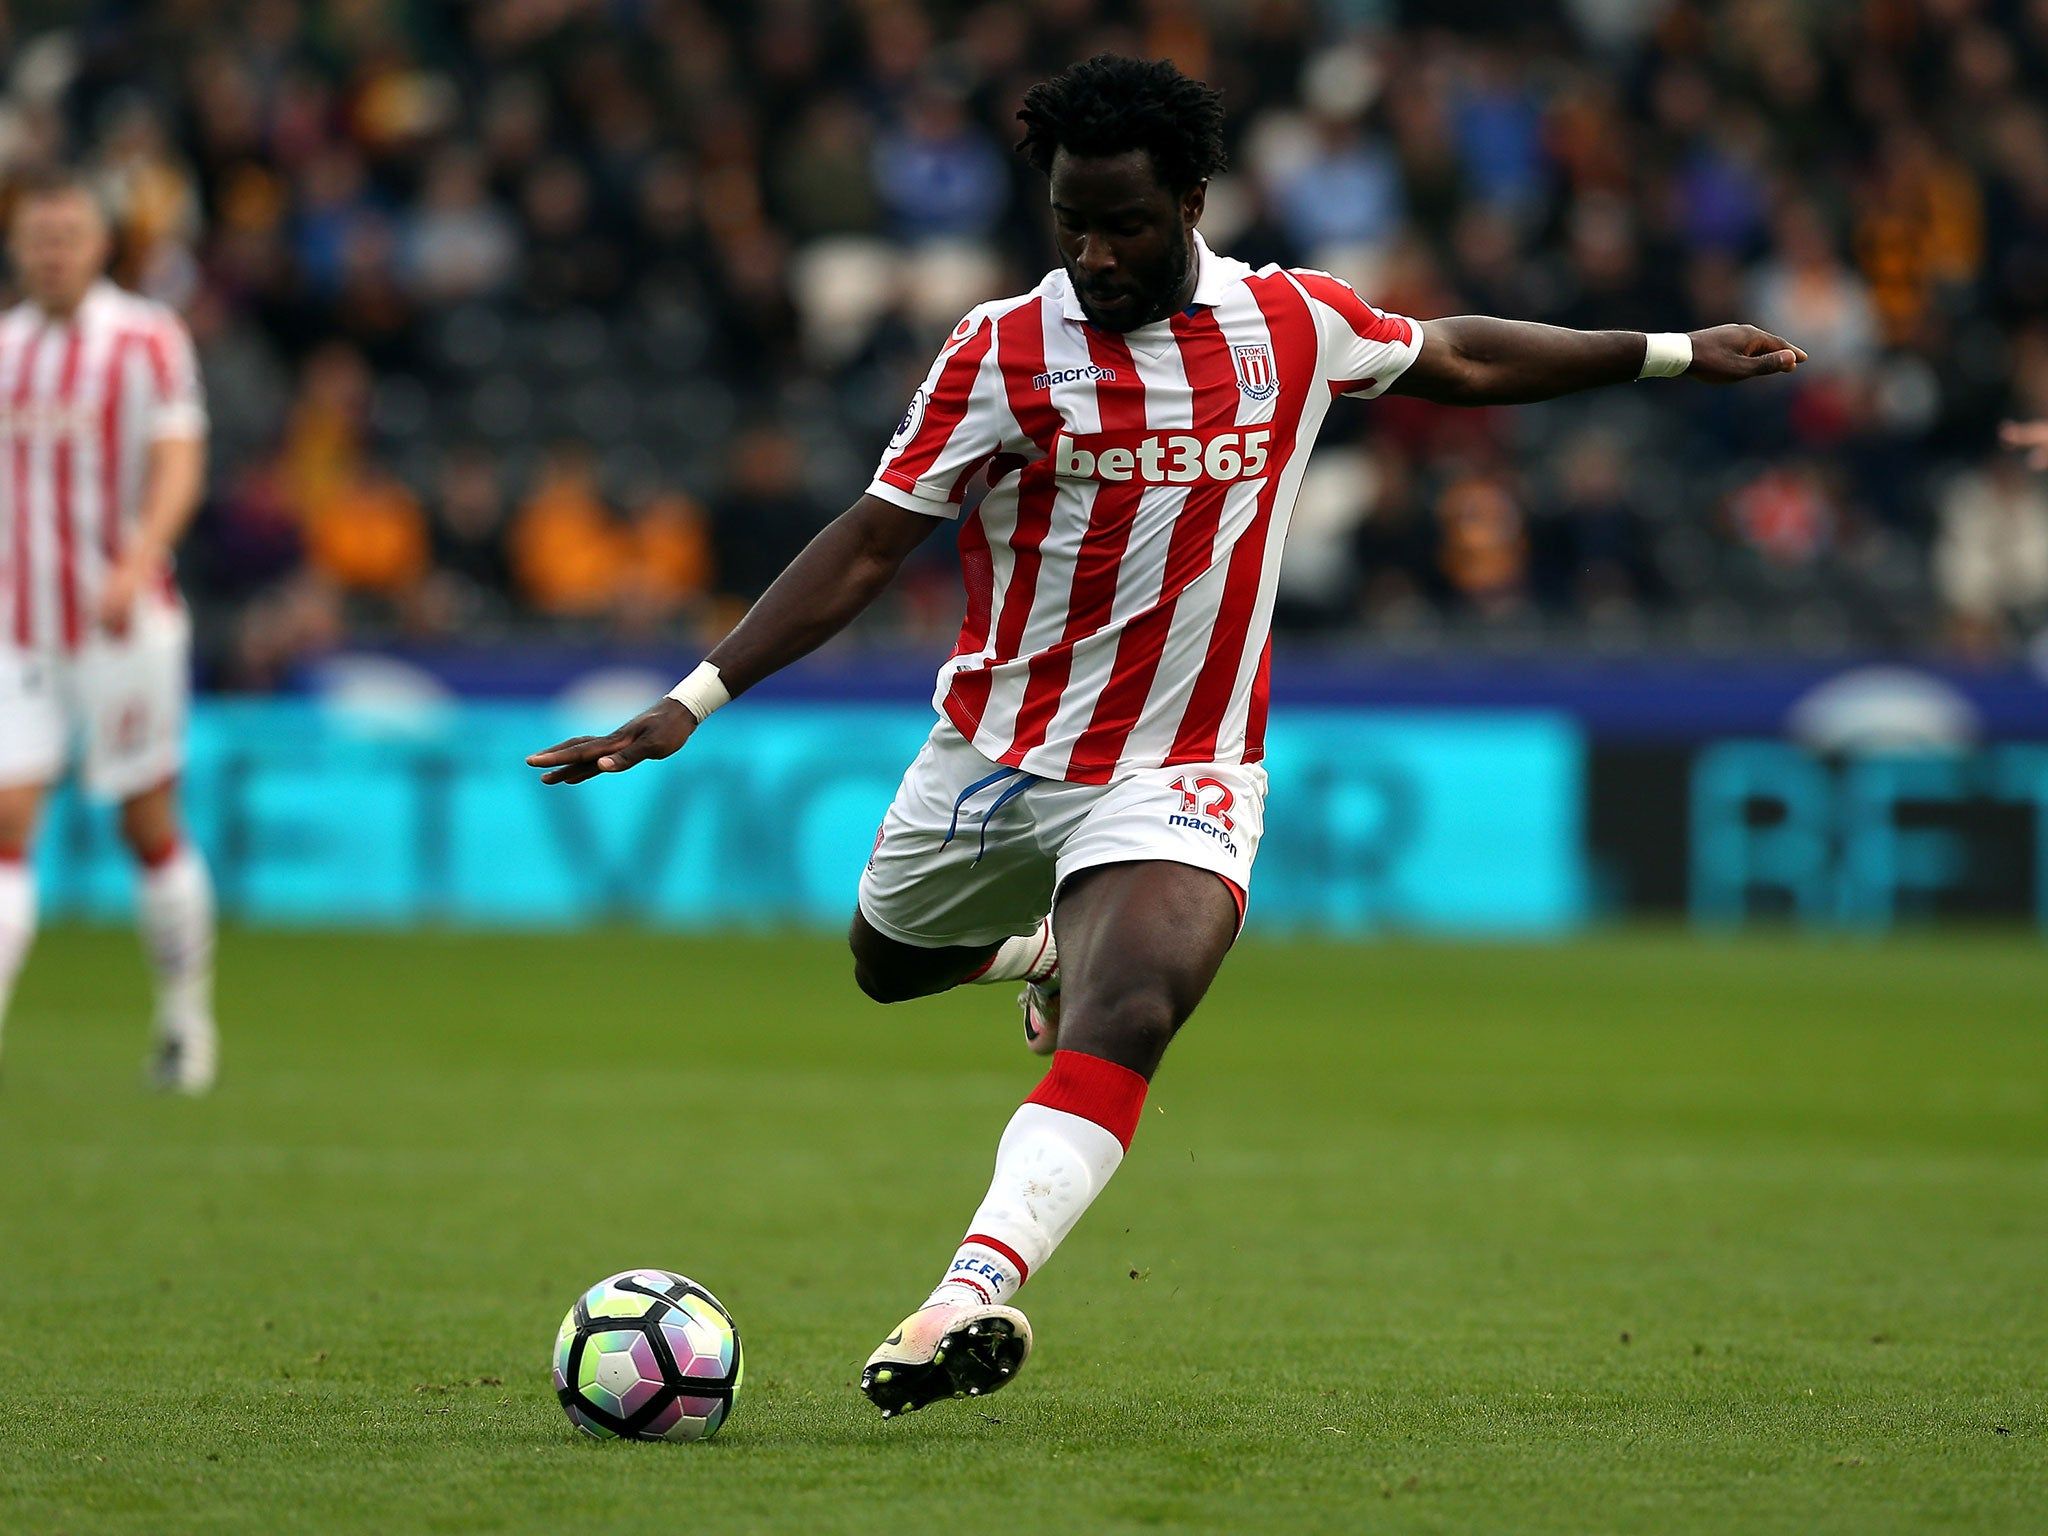 Stoke news: Potters could lose Wilfried Bony due to clause in contract permitting sale to Chinese Super League